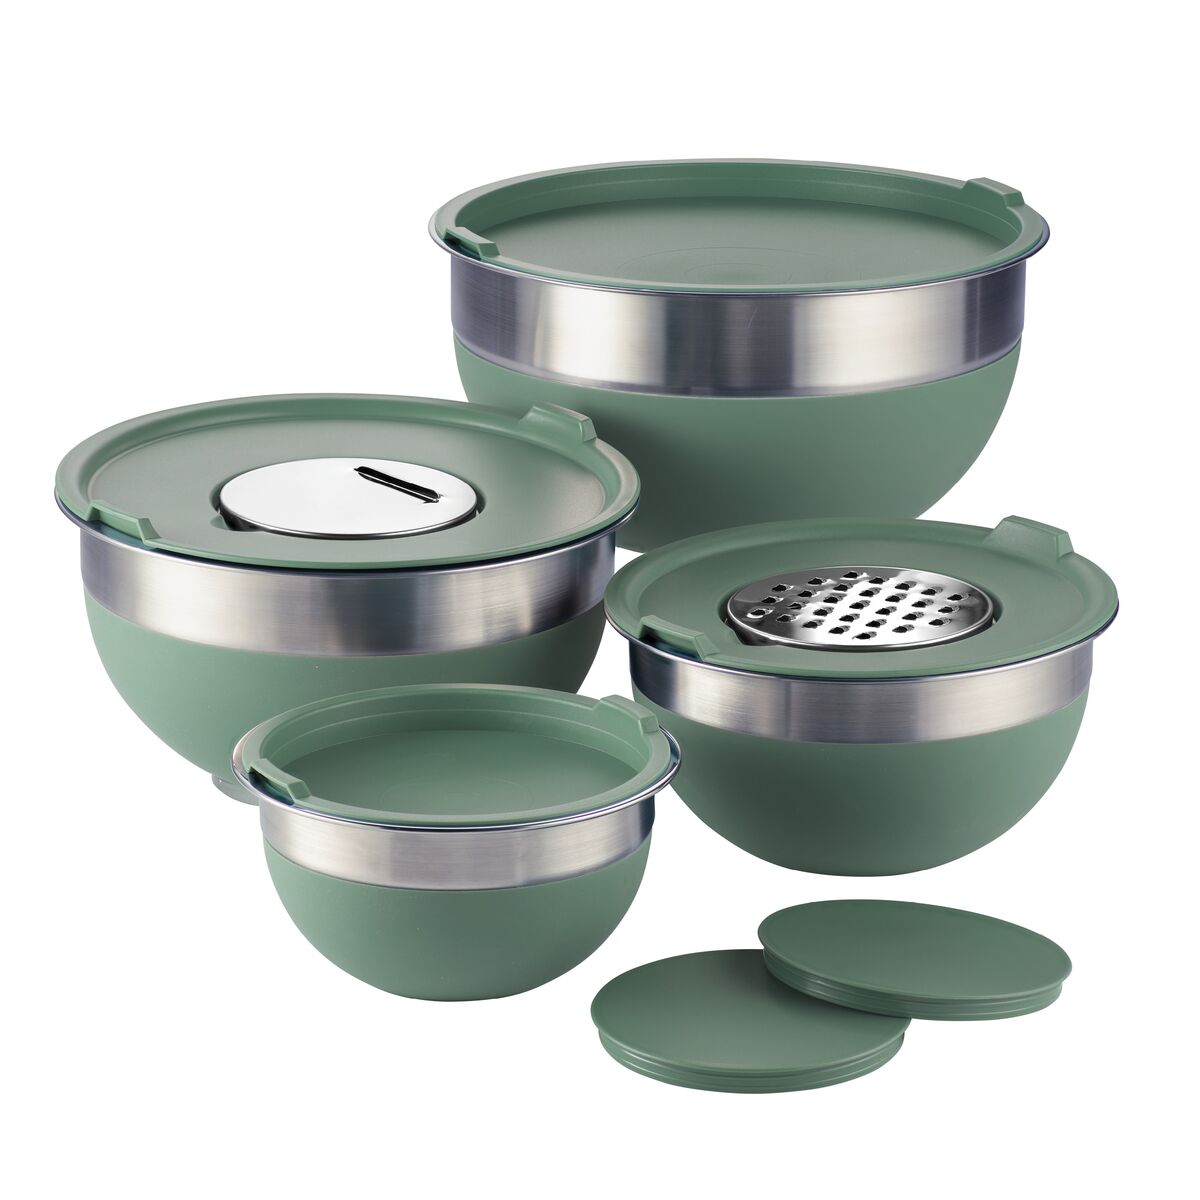 10 PC Covered Stainless Steel and Silicone Mixing Bowl Set with Grating Tools - Sea Salt Green